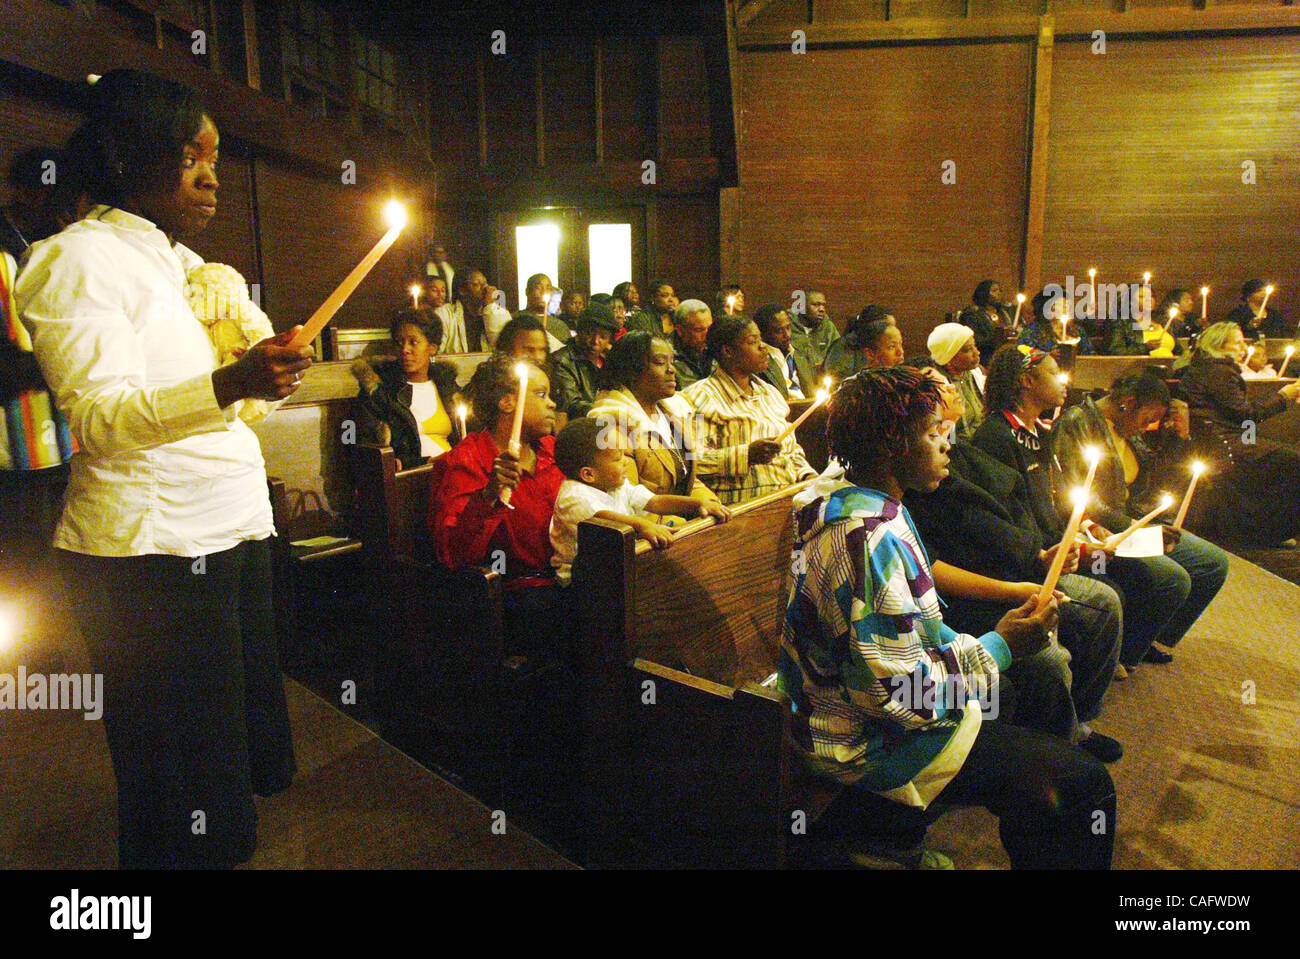 Sherry Lomack, left, along with family and community members light candles during the memorial for her mother Anita Gay at South Berkeley Community Church in Berkeley, Calif., Thursday Feb. 21, 2008. Gay was shot dead by a Berkeley Police officer last Saturday night outside her apartment on 1727 War Stock Photo